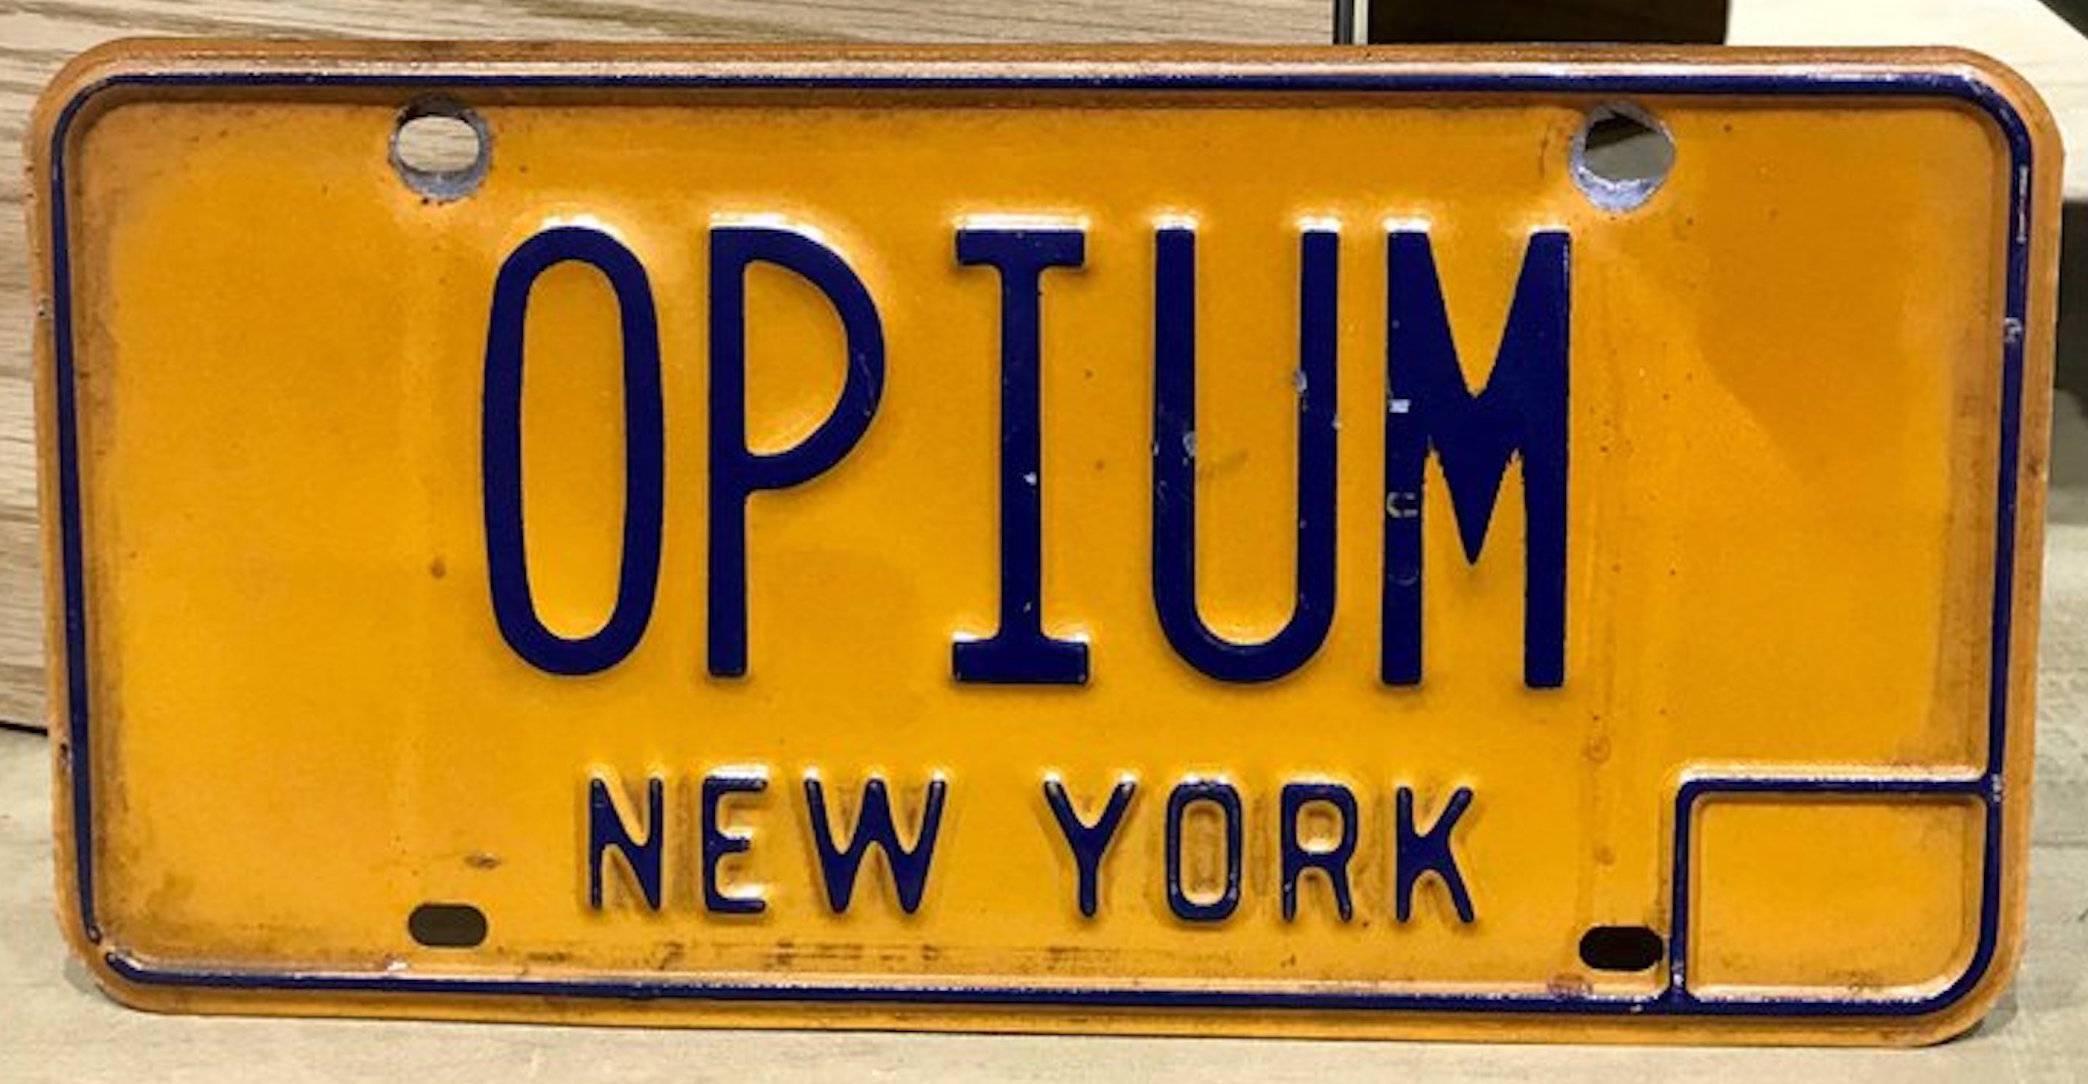 New York vanity license plate OPIUM, authentic vintage license plate.

If you love a touch of antiquity, check out this New York Vanity License Plate OPIUM. Owned and used on a vehicle from the late 20th century, it screams the charm and flavor of